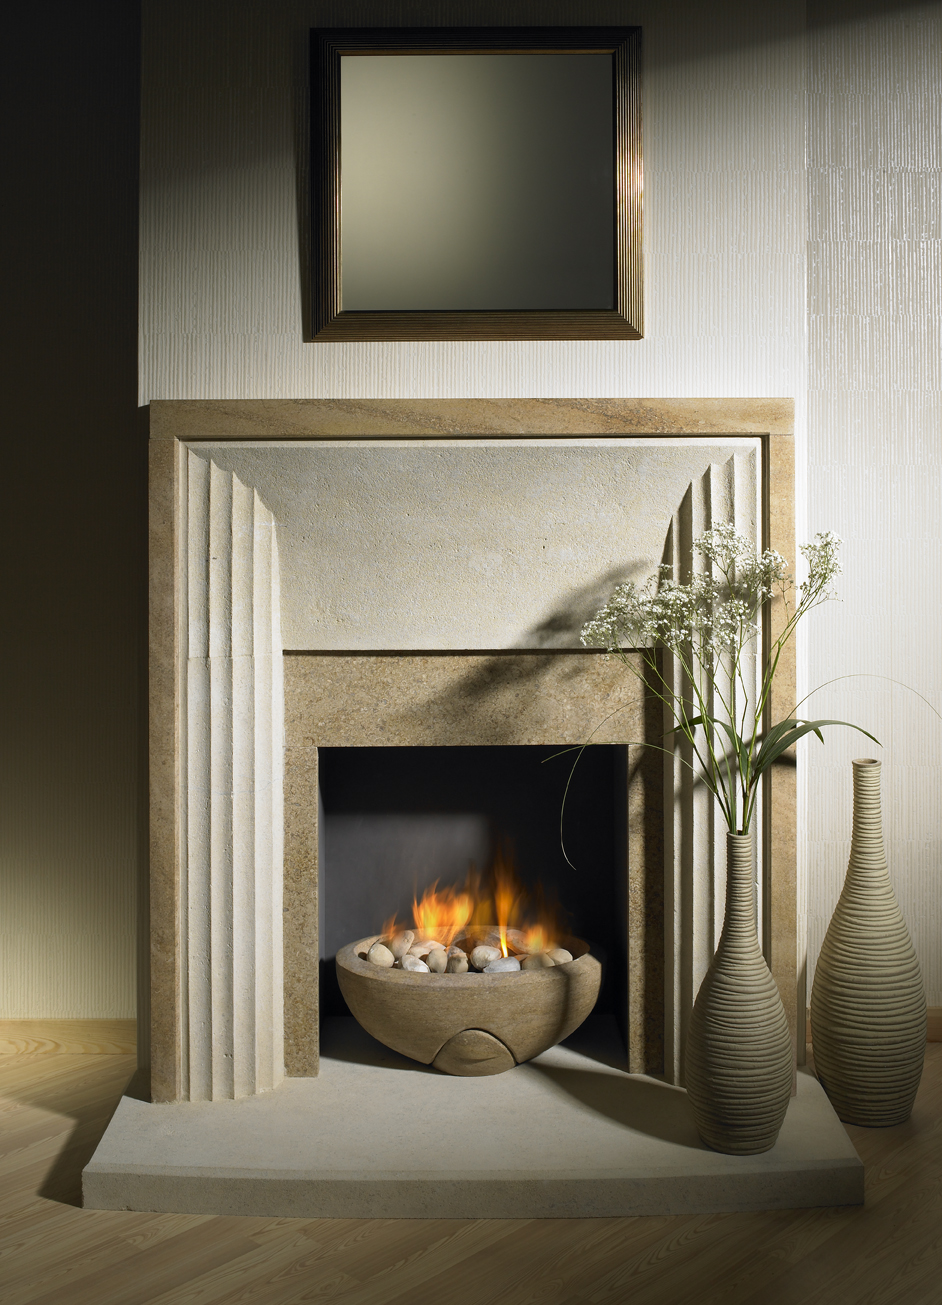 7. Manhattan style fireplace in Bathstone and Ancaster Weatherbed, with Weatherbed firebowl – Kensington